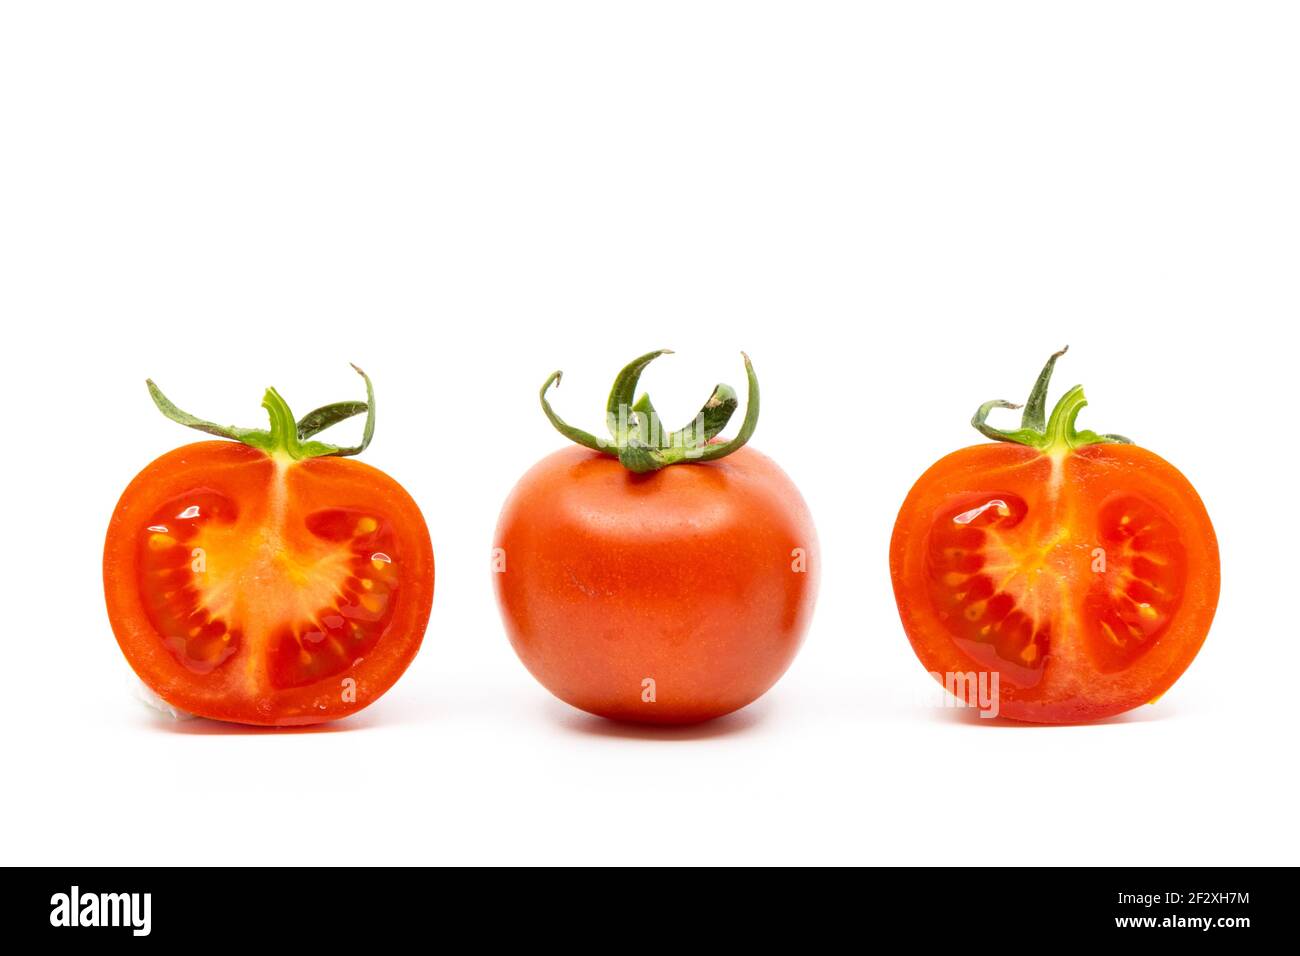 Whole Tomato and Two Halves of Tomatoes Isolated on White Background Stock Photo